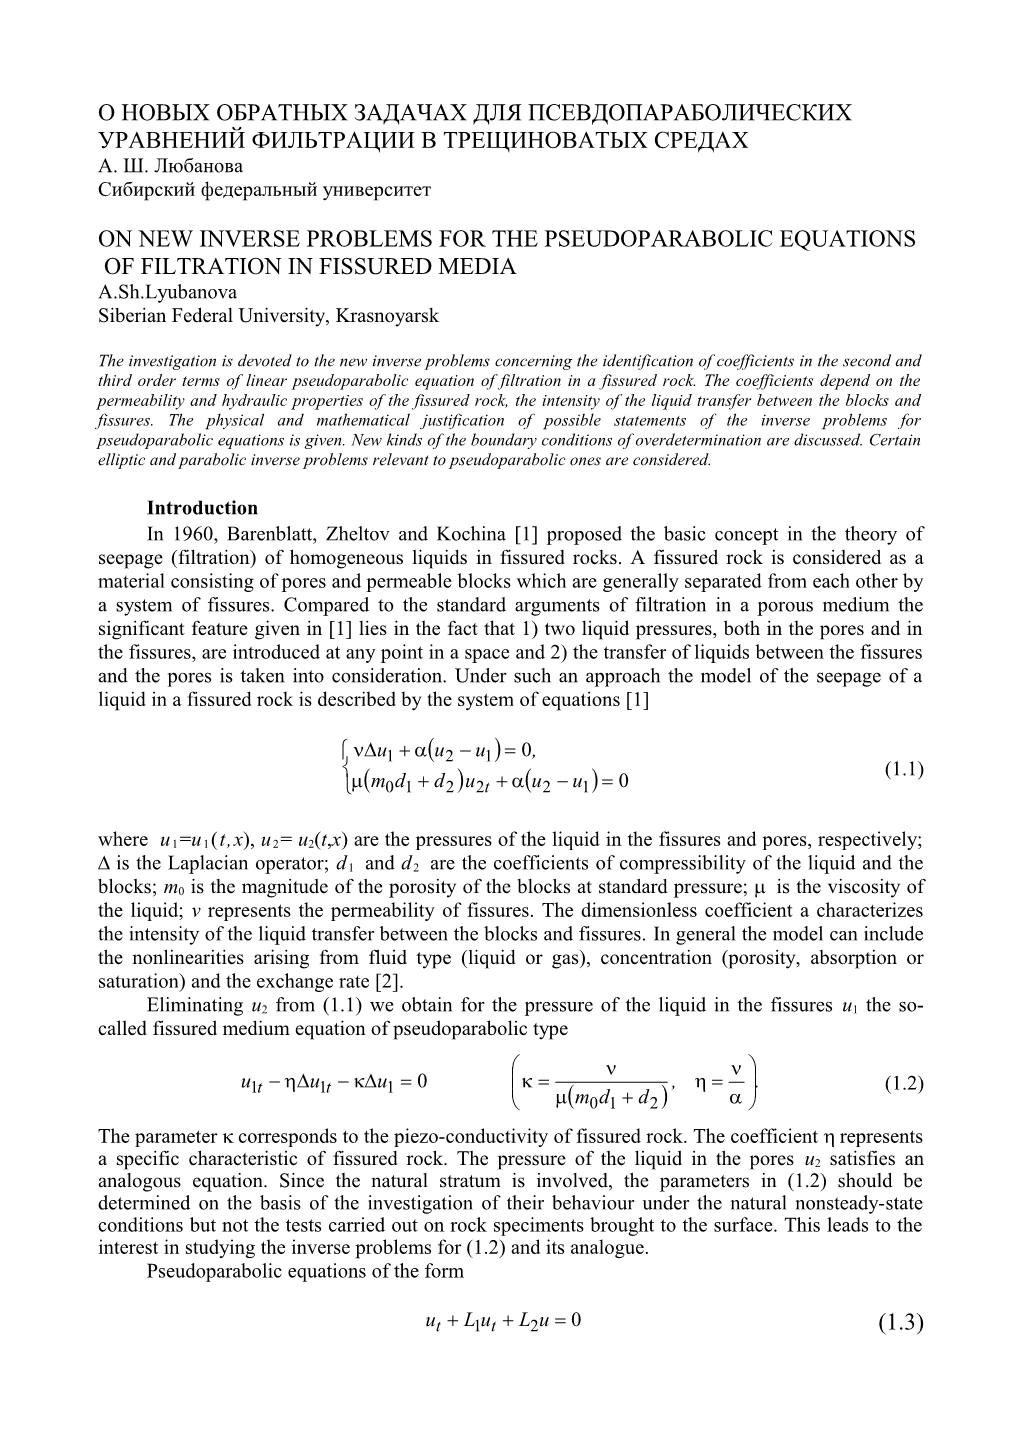 On New Inverse Problems for the Pseudoparabolic Equations